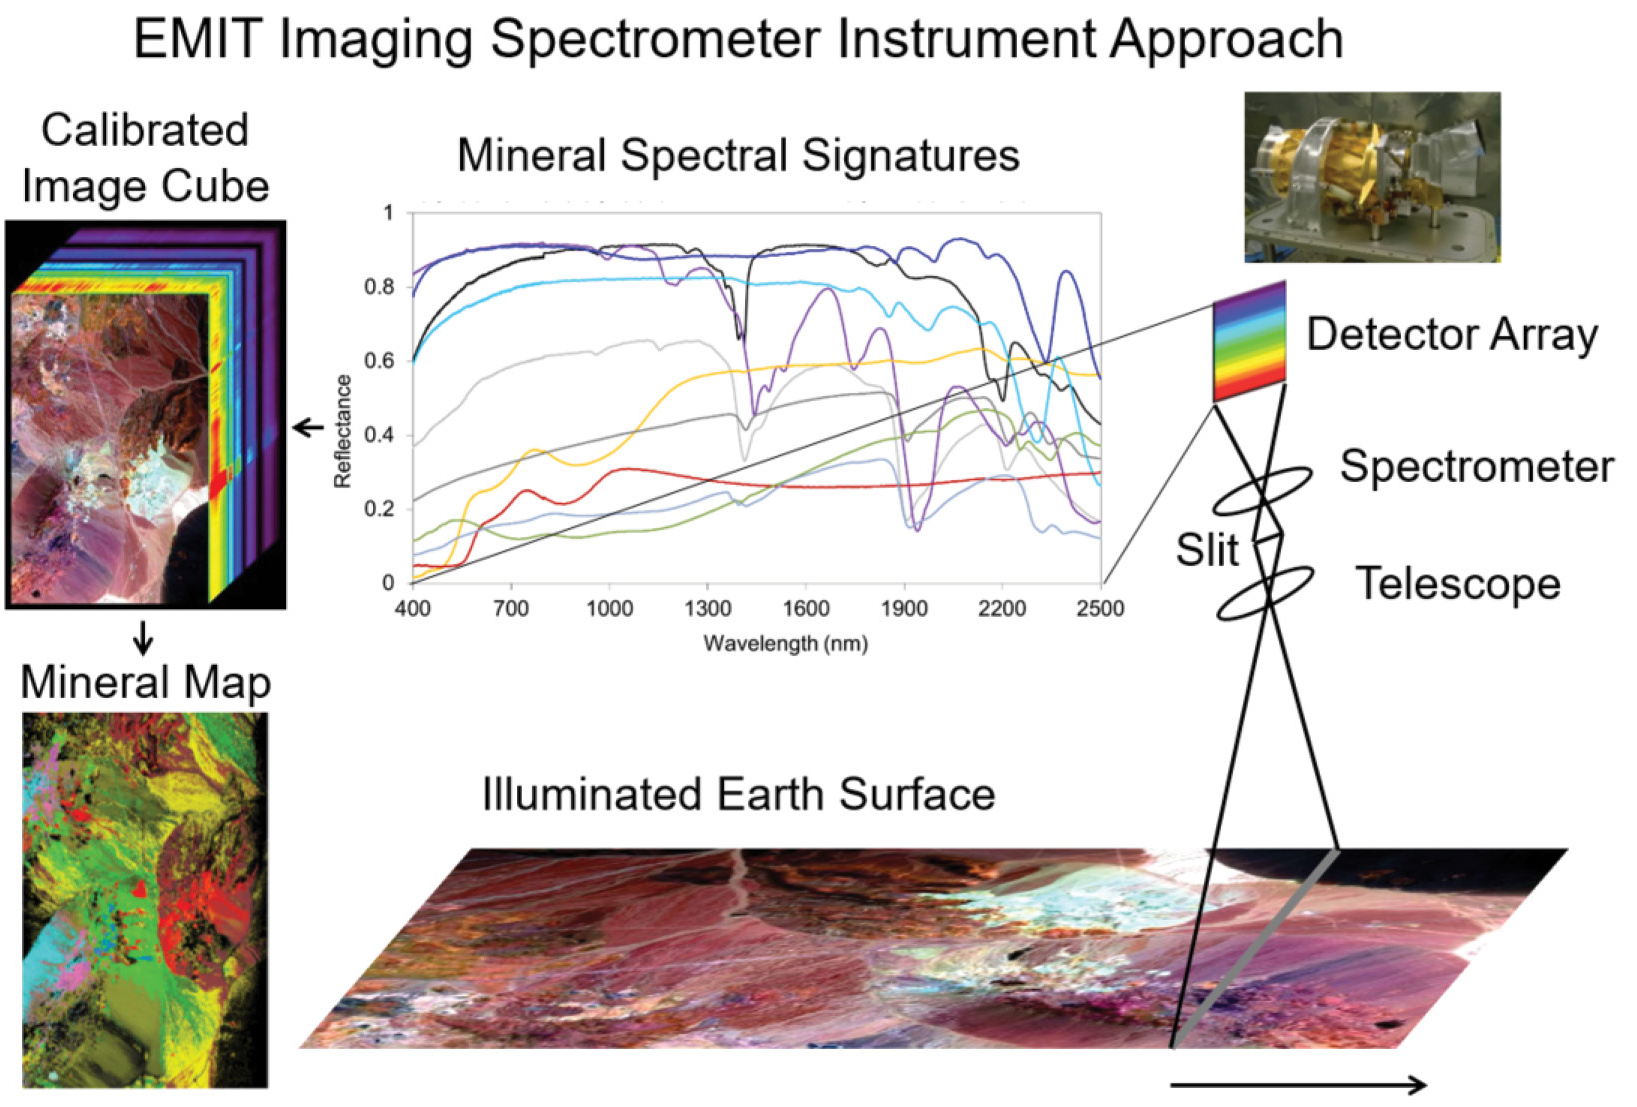 EMIT Imaging Spectrometer Instrument Approach graphic. 